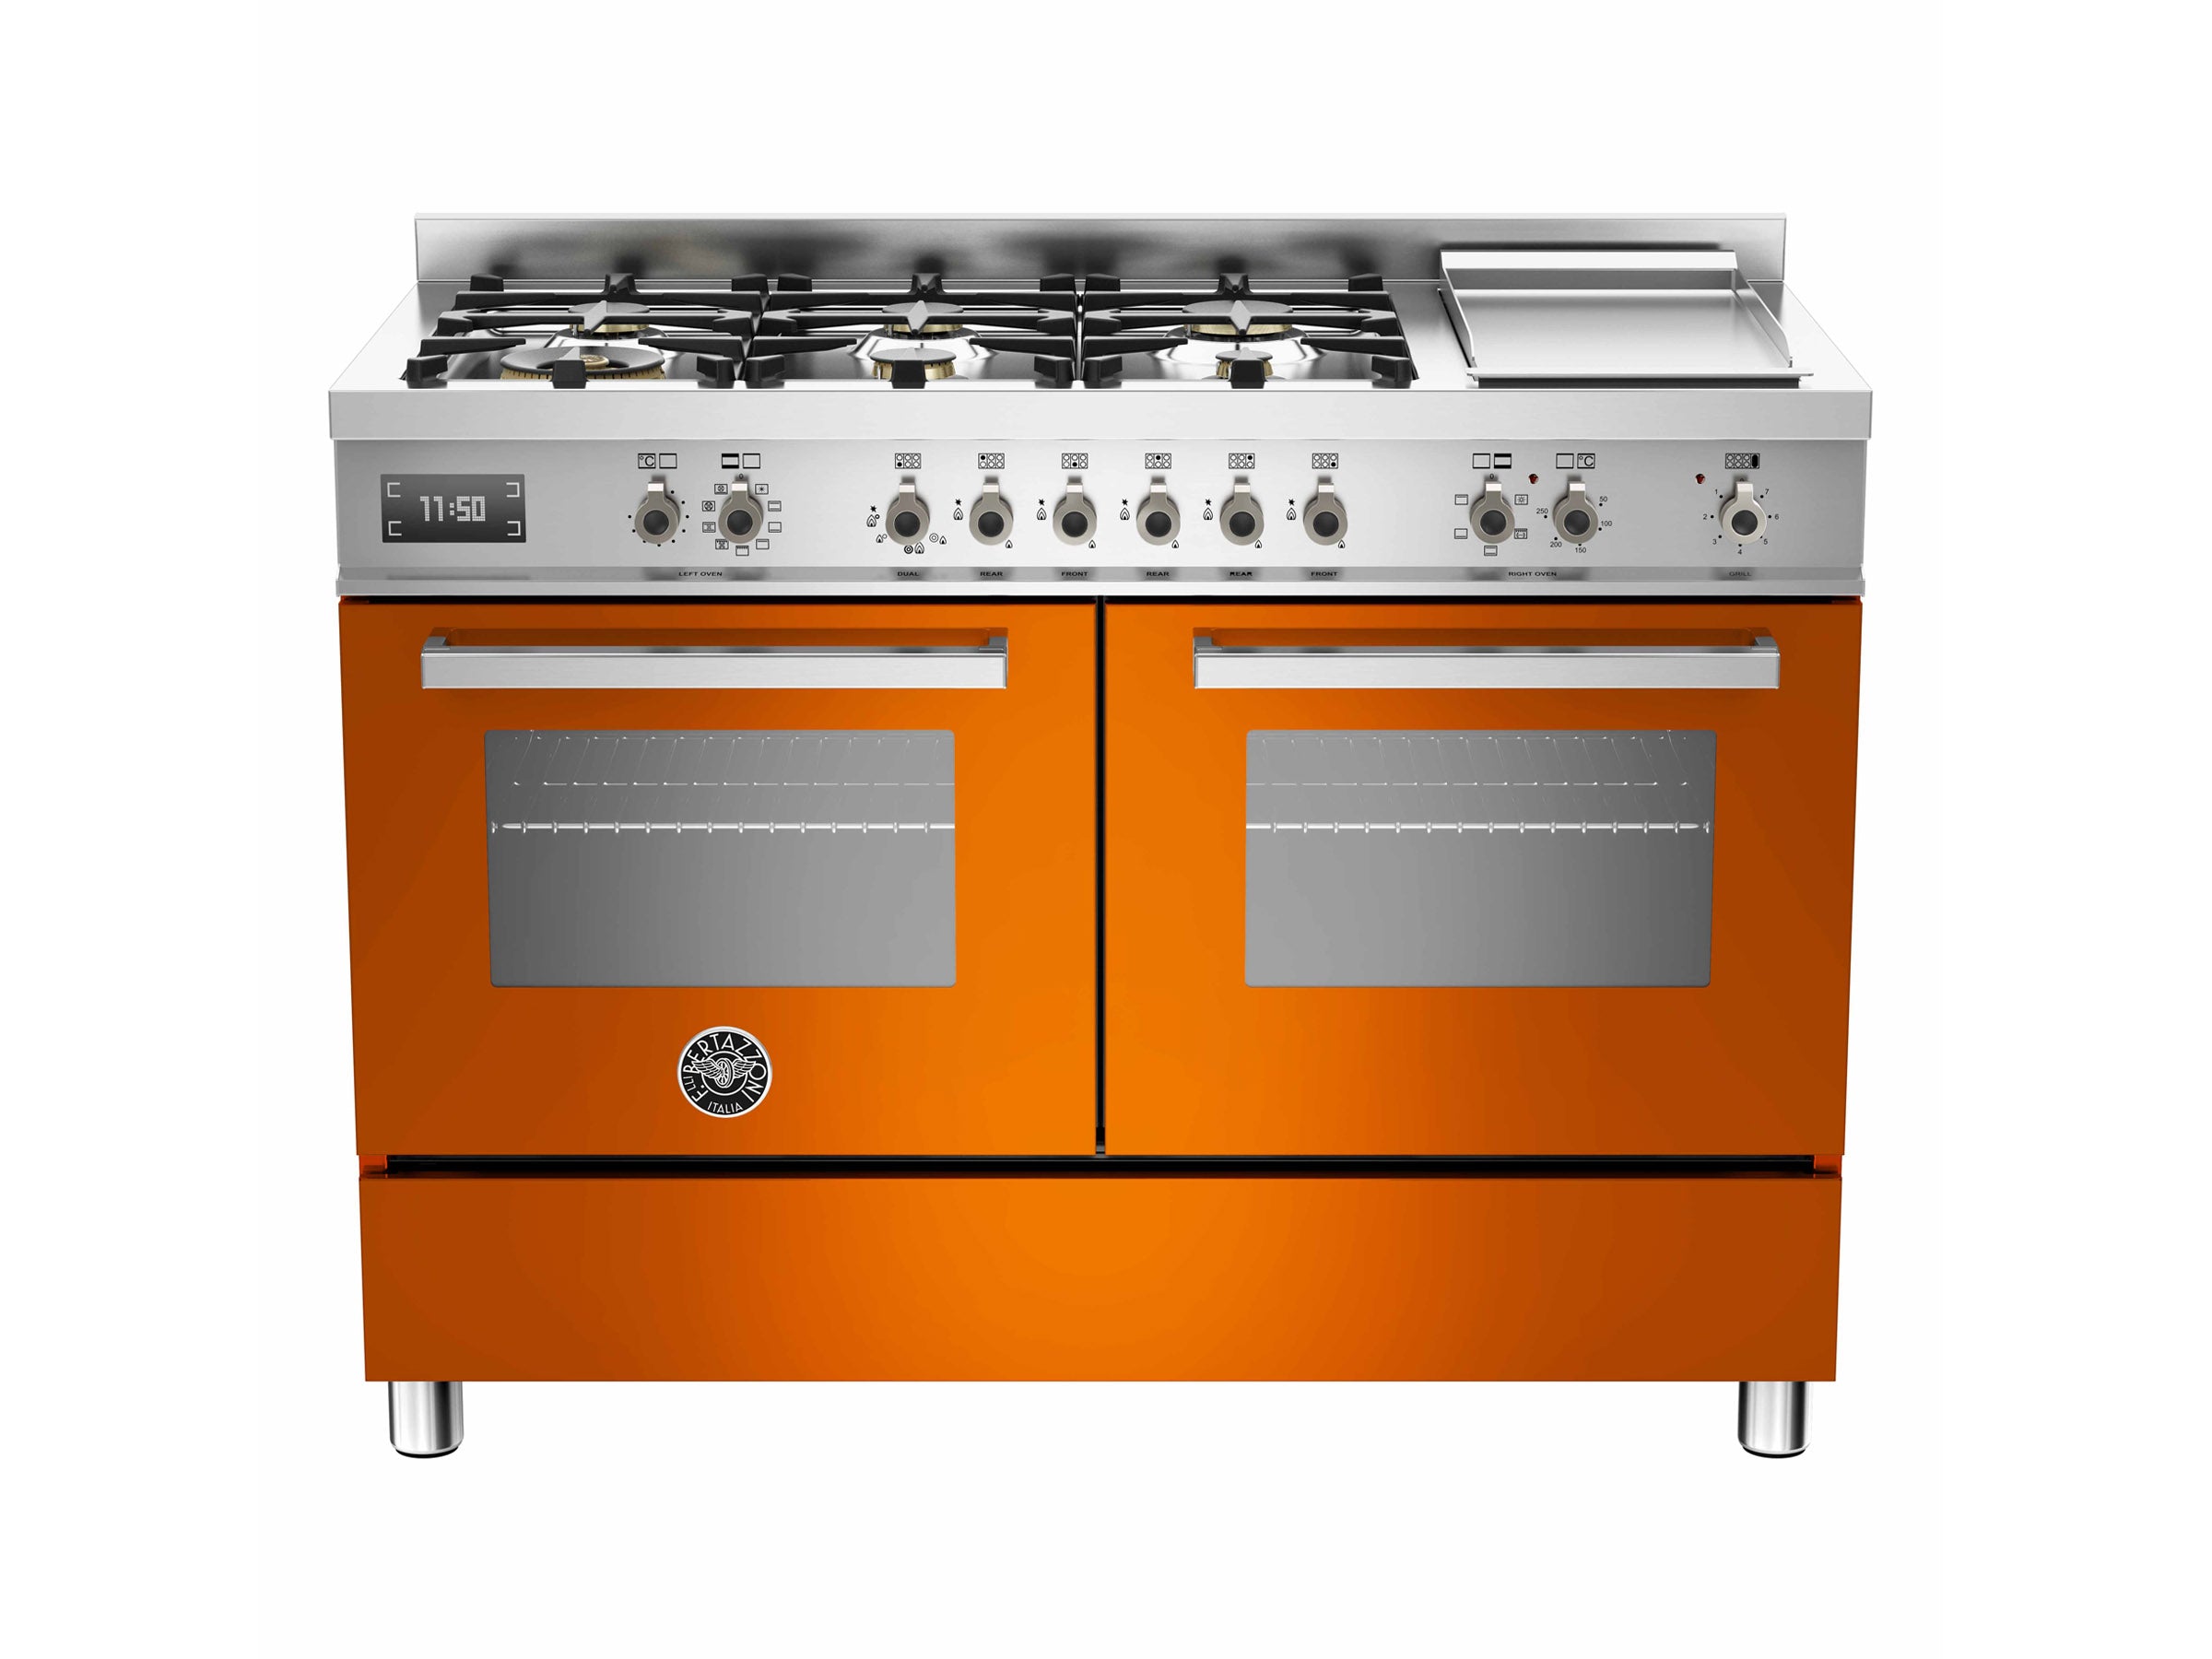 Bertazzoni PRO1206GMFED Professional Series 120cm 6-Burner + Griddle Electric Double Oven